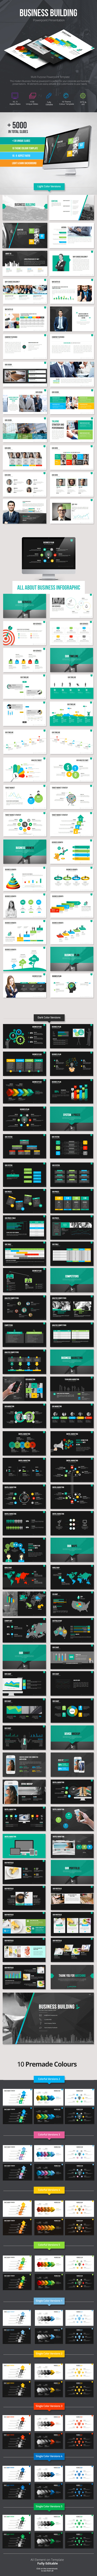 Business Building Keynote Templates